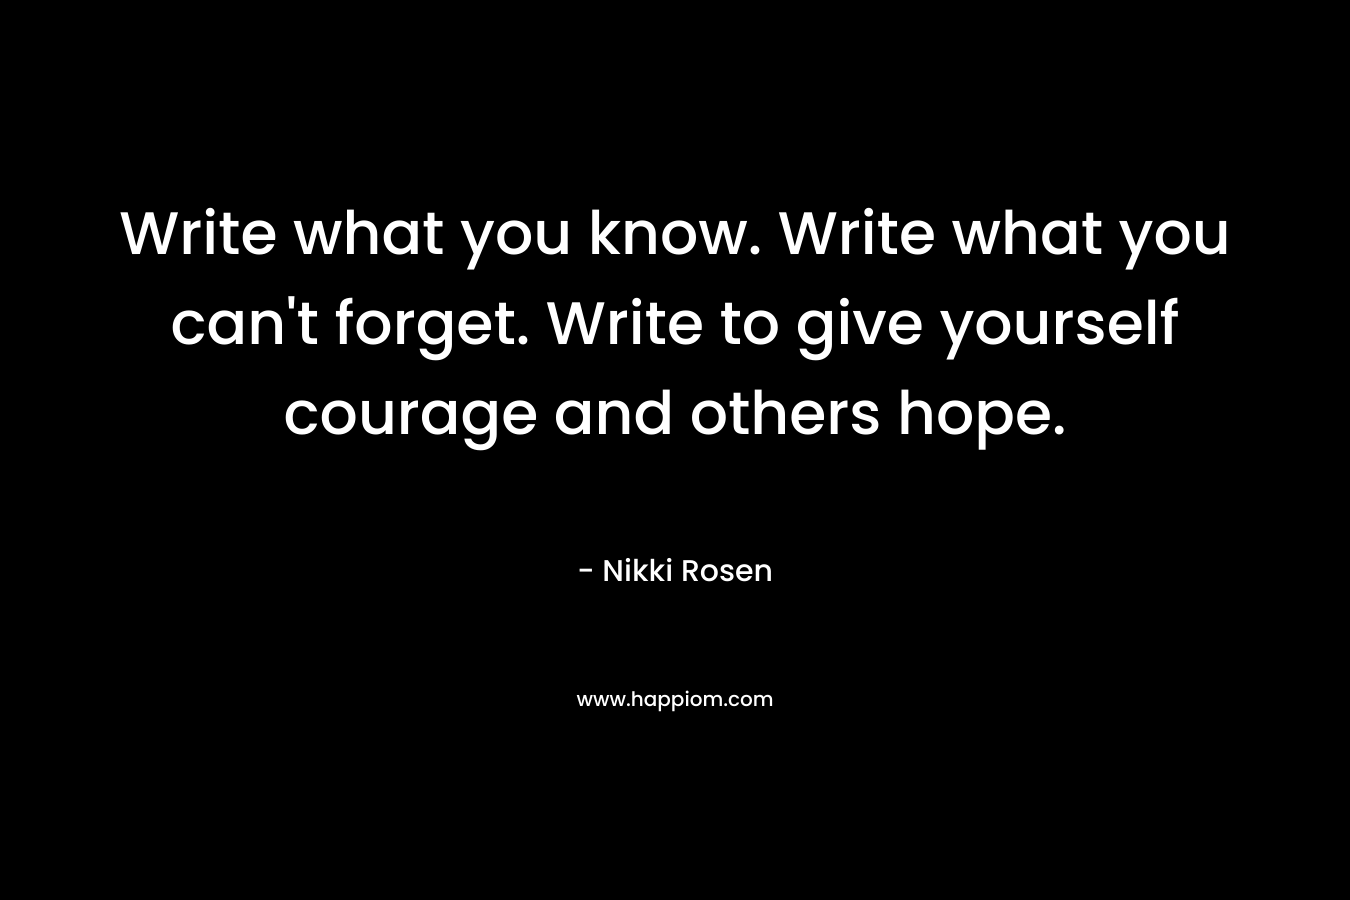 Write what you know. Write what you can't forget. Write to give yourself courage and others hope.